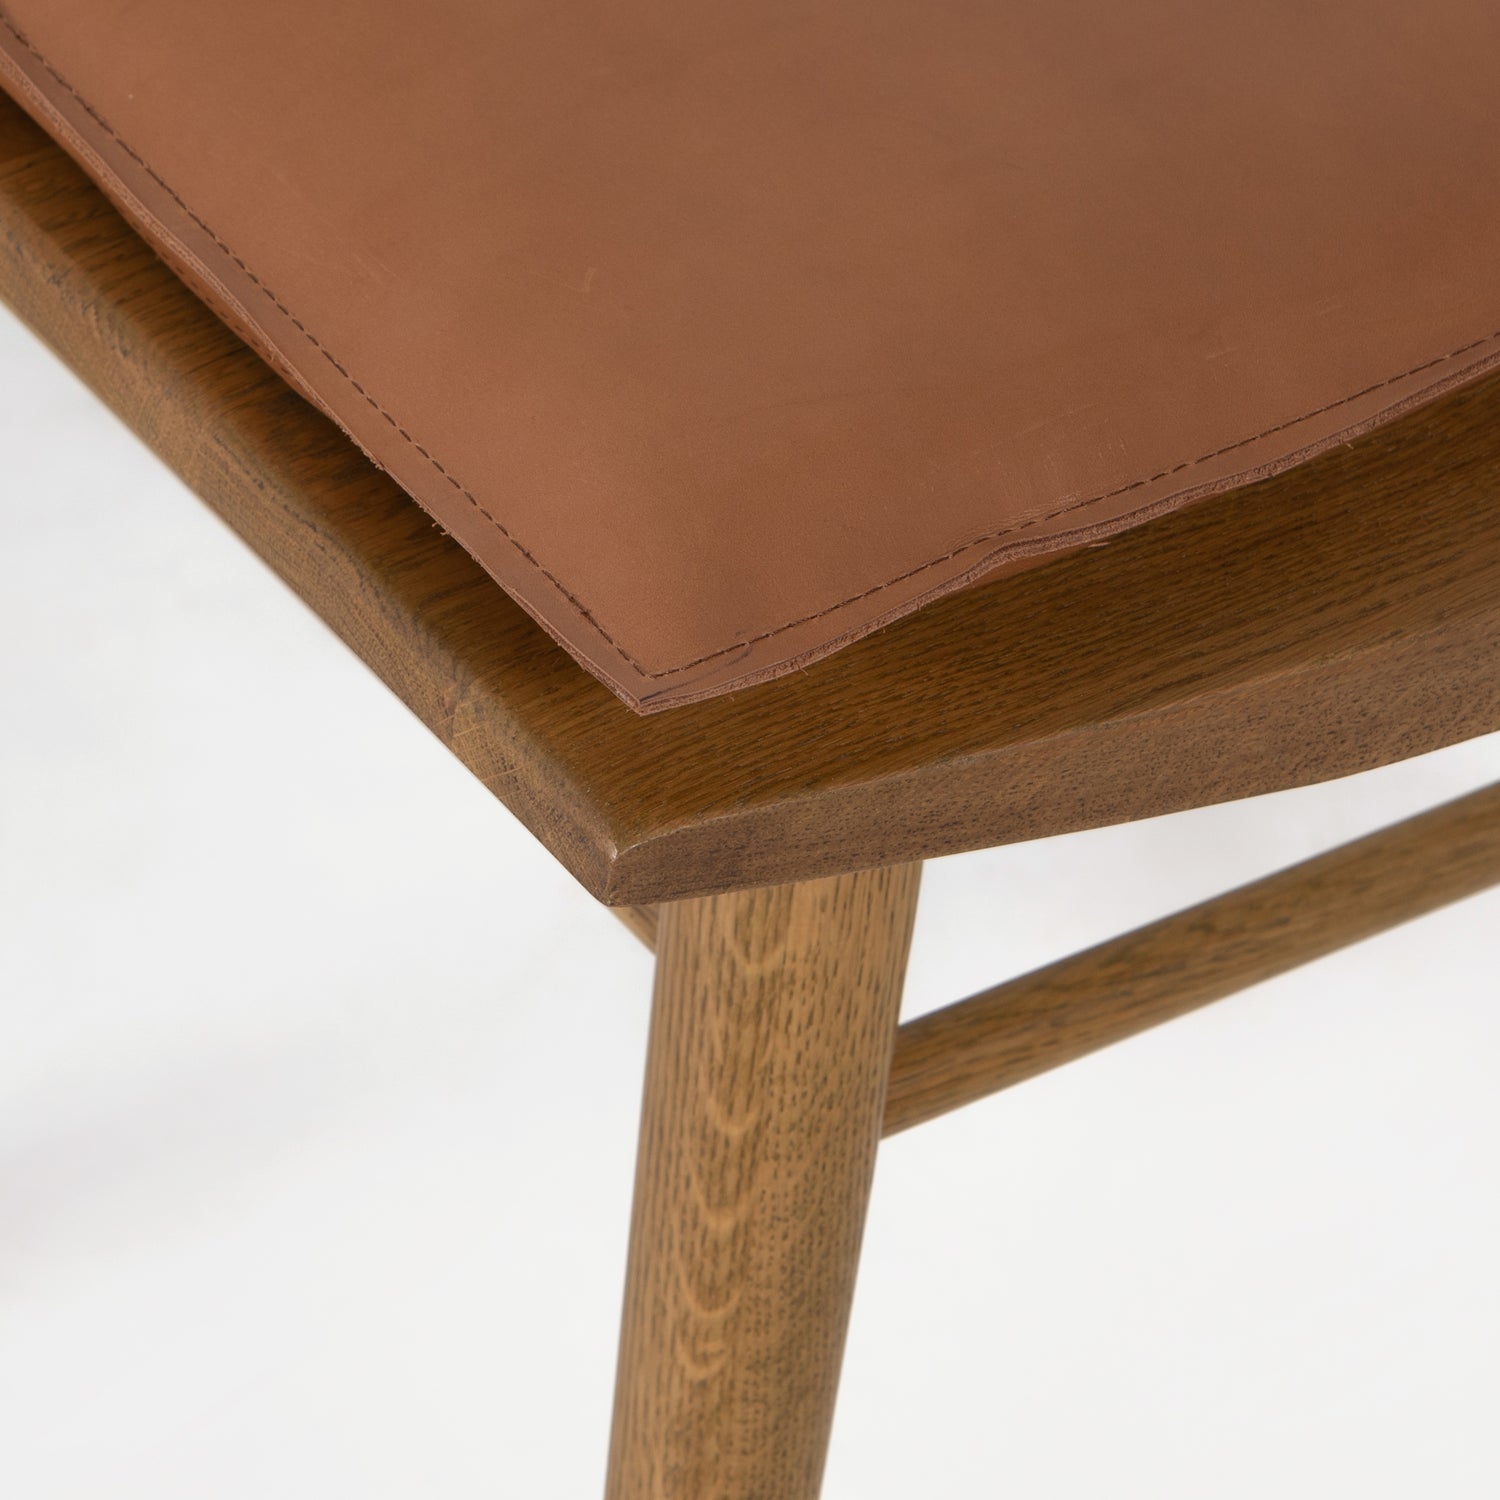 Sandy Oak & Whiskey Saddle Leather with Ivory Backing Fabric | Lewis Windsor Chair | Valley Ridge Furniture